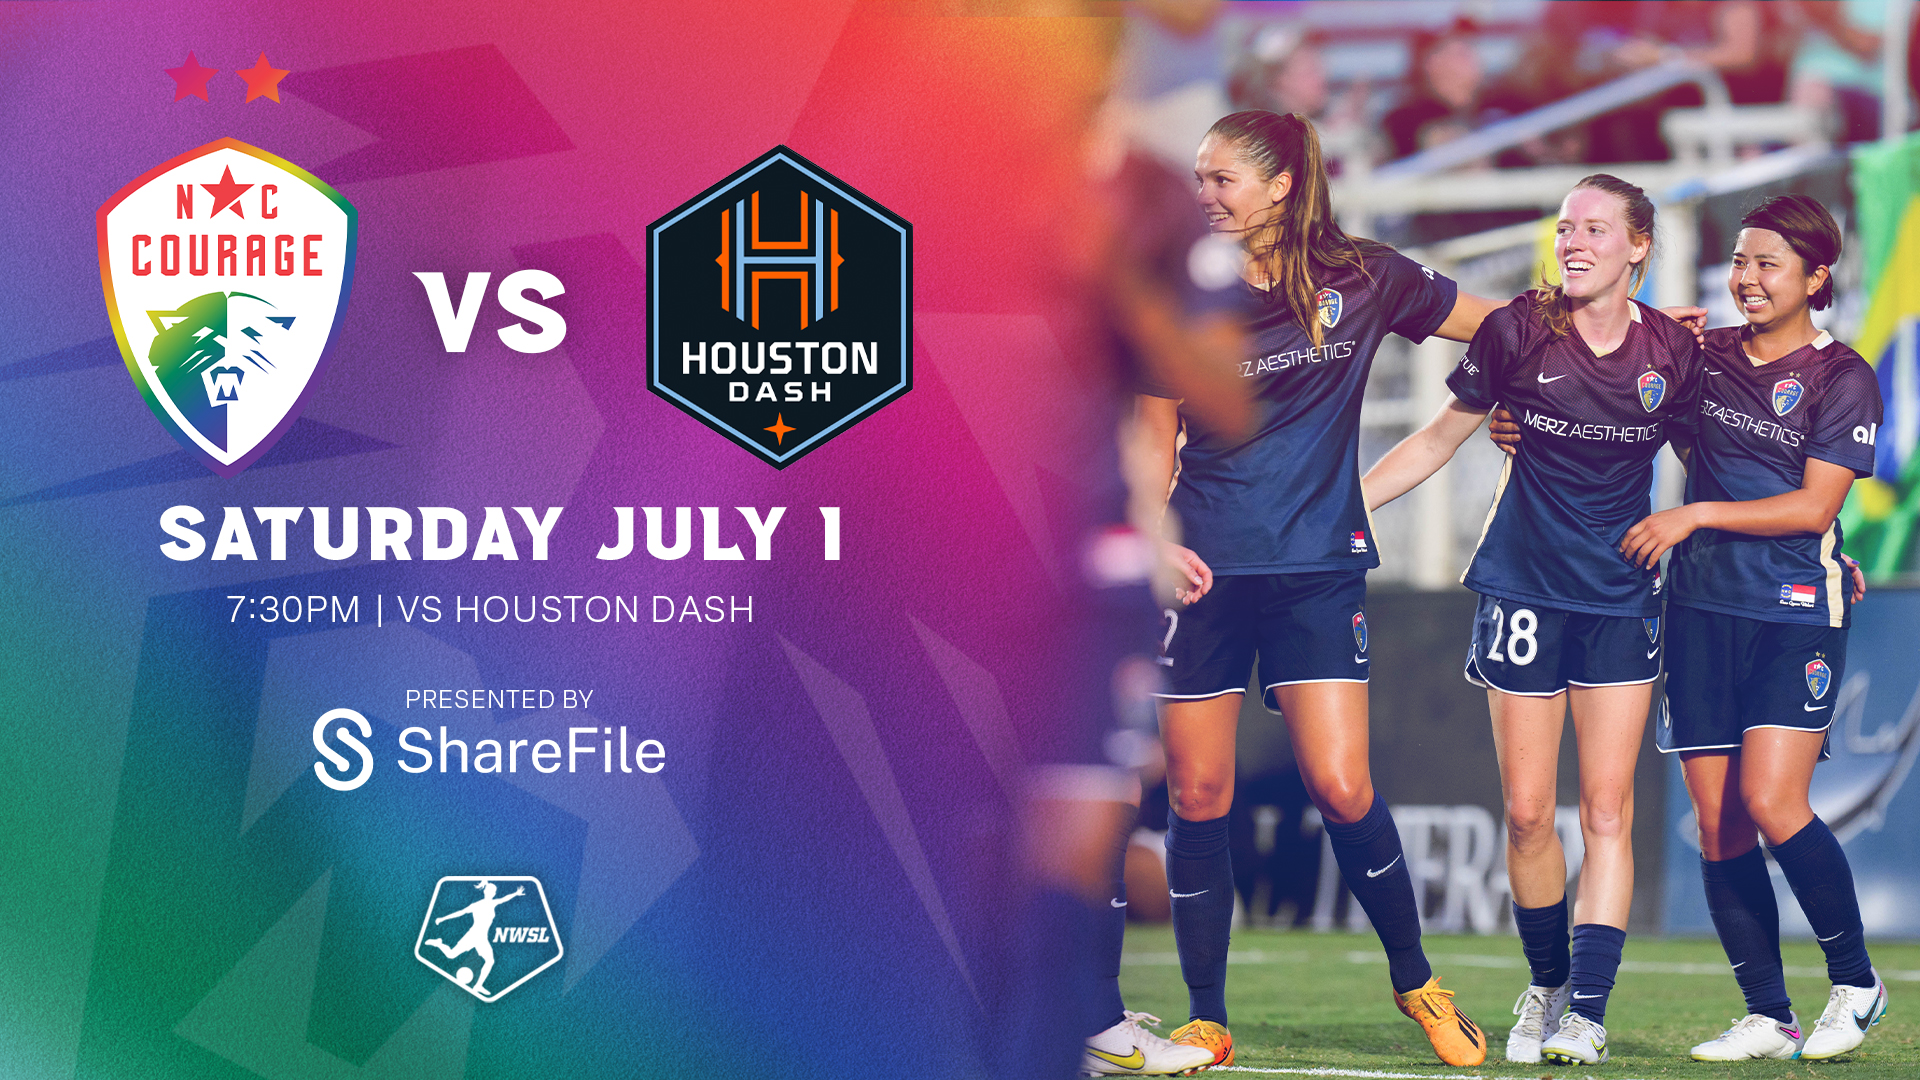 LIMITED TIME OFFER] Game-worn NC - North Carolina Courage